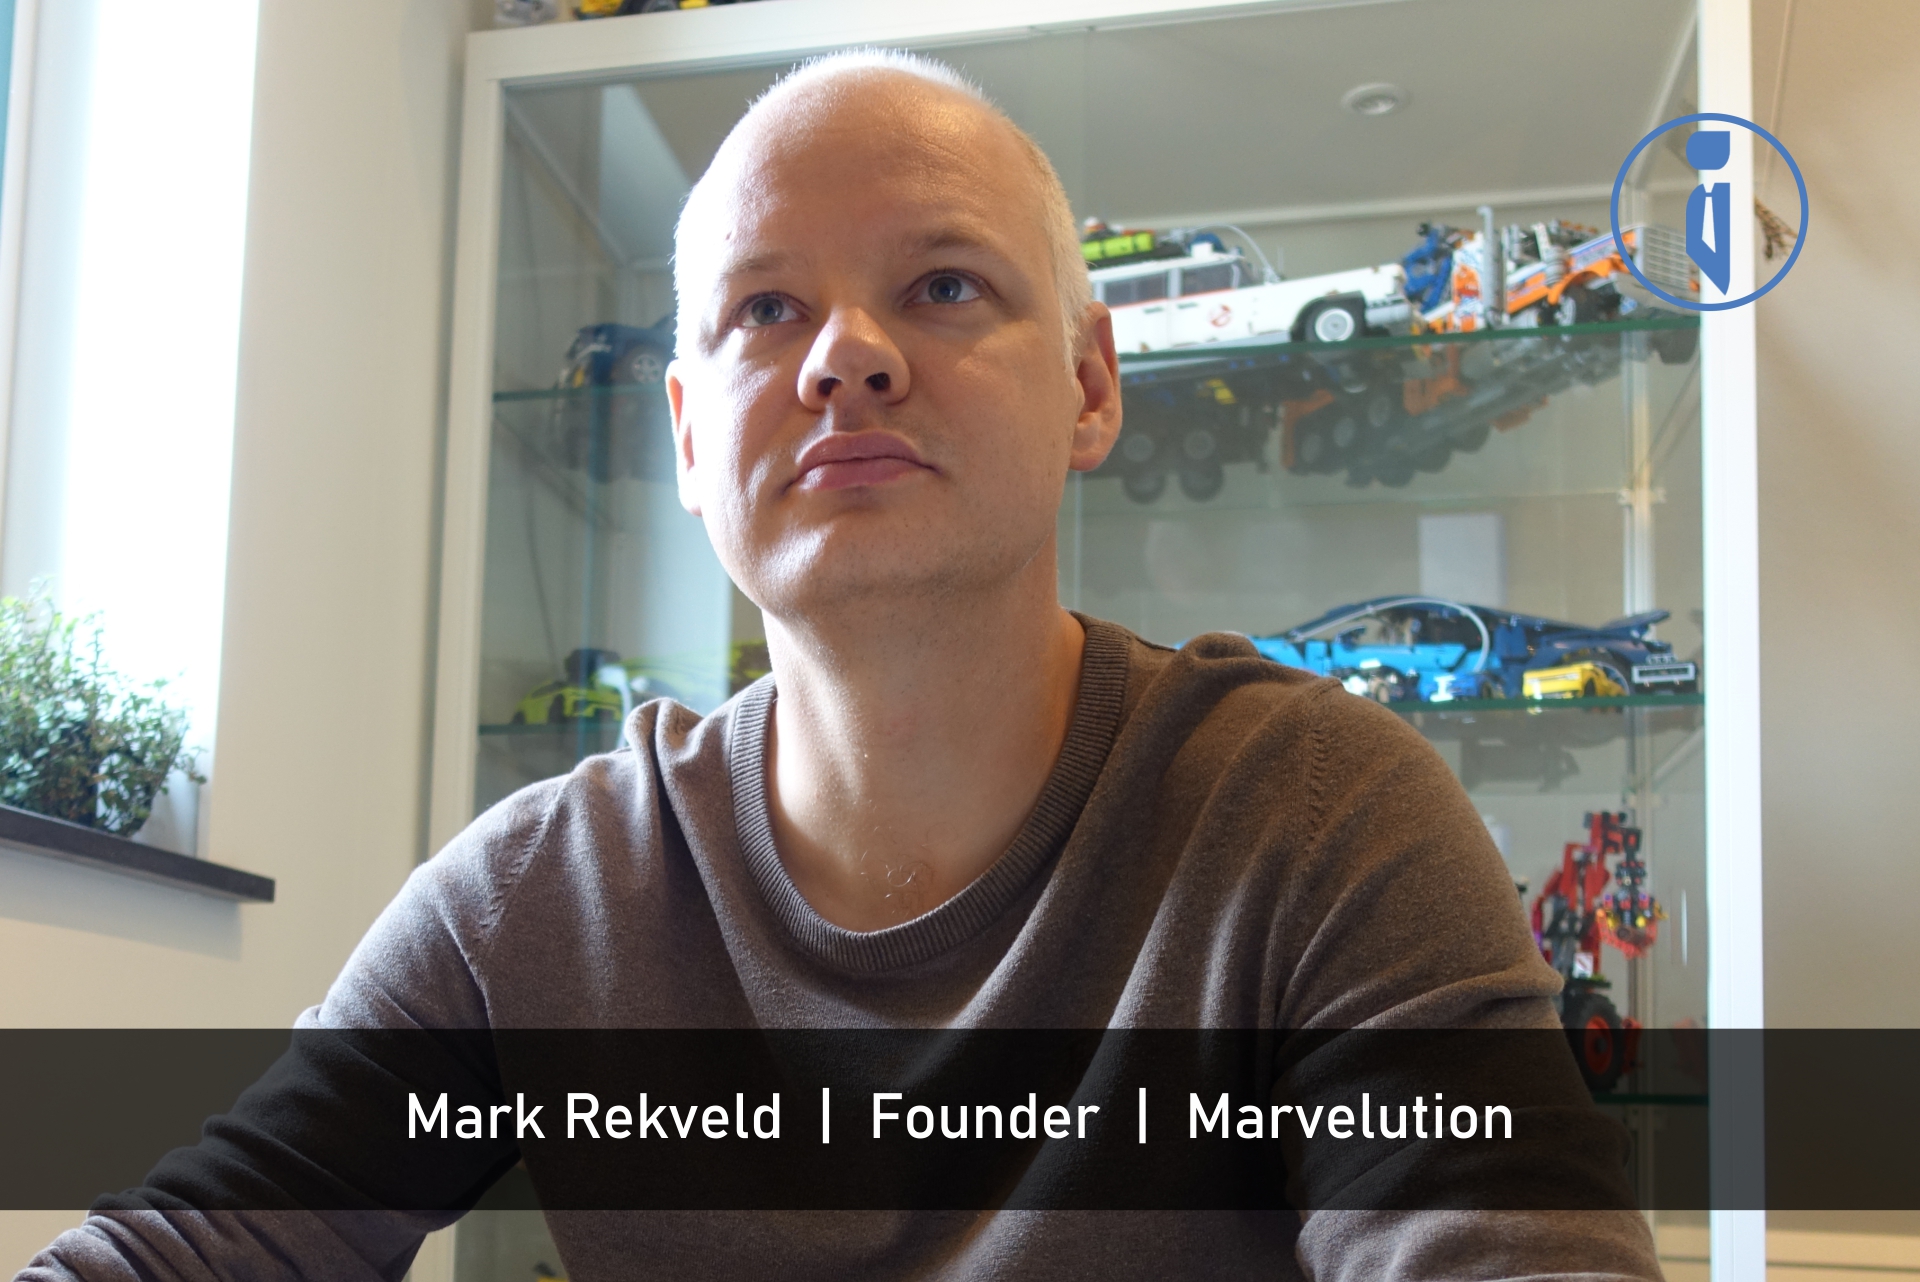 Marvelution- Leading with Marvelous Solutions Under One Roof